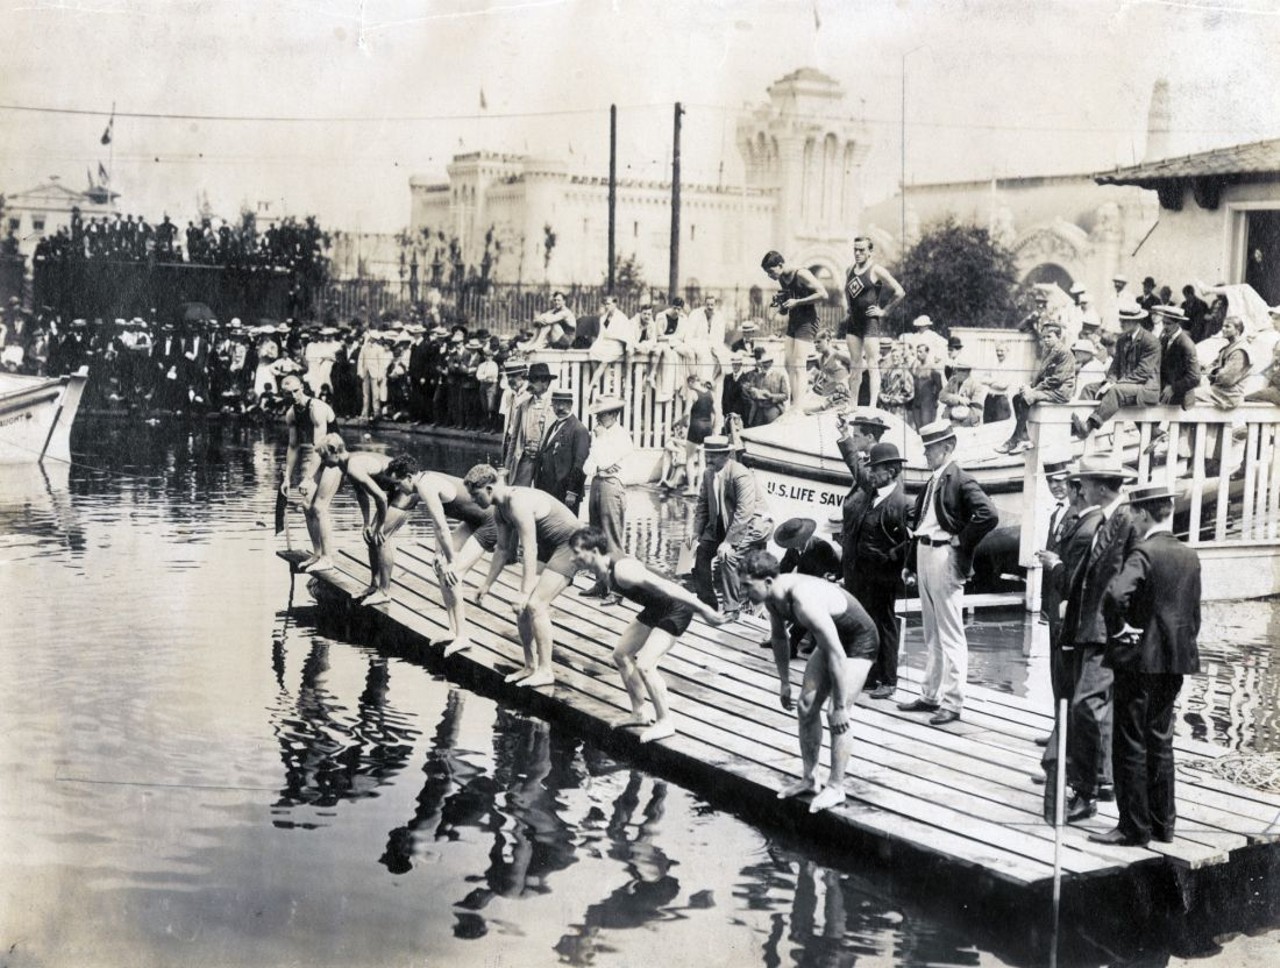 Hungarian champion Zoltan Halmay, far left, at the start of the championship heat of the 100-yard swimming dash at the 1904 Olympics.
The swimming events took place in Forest Park. 